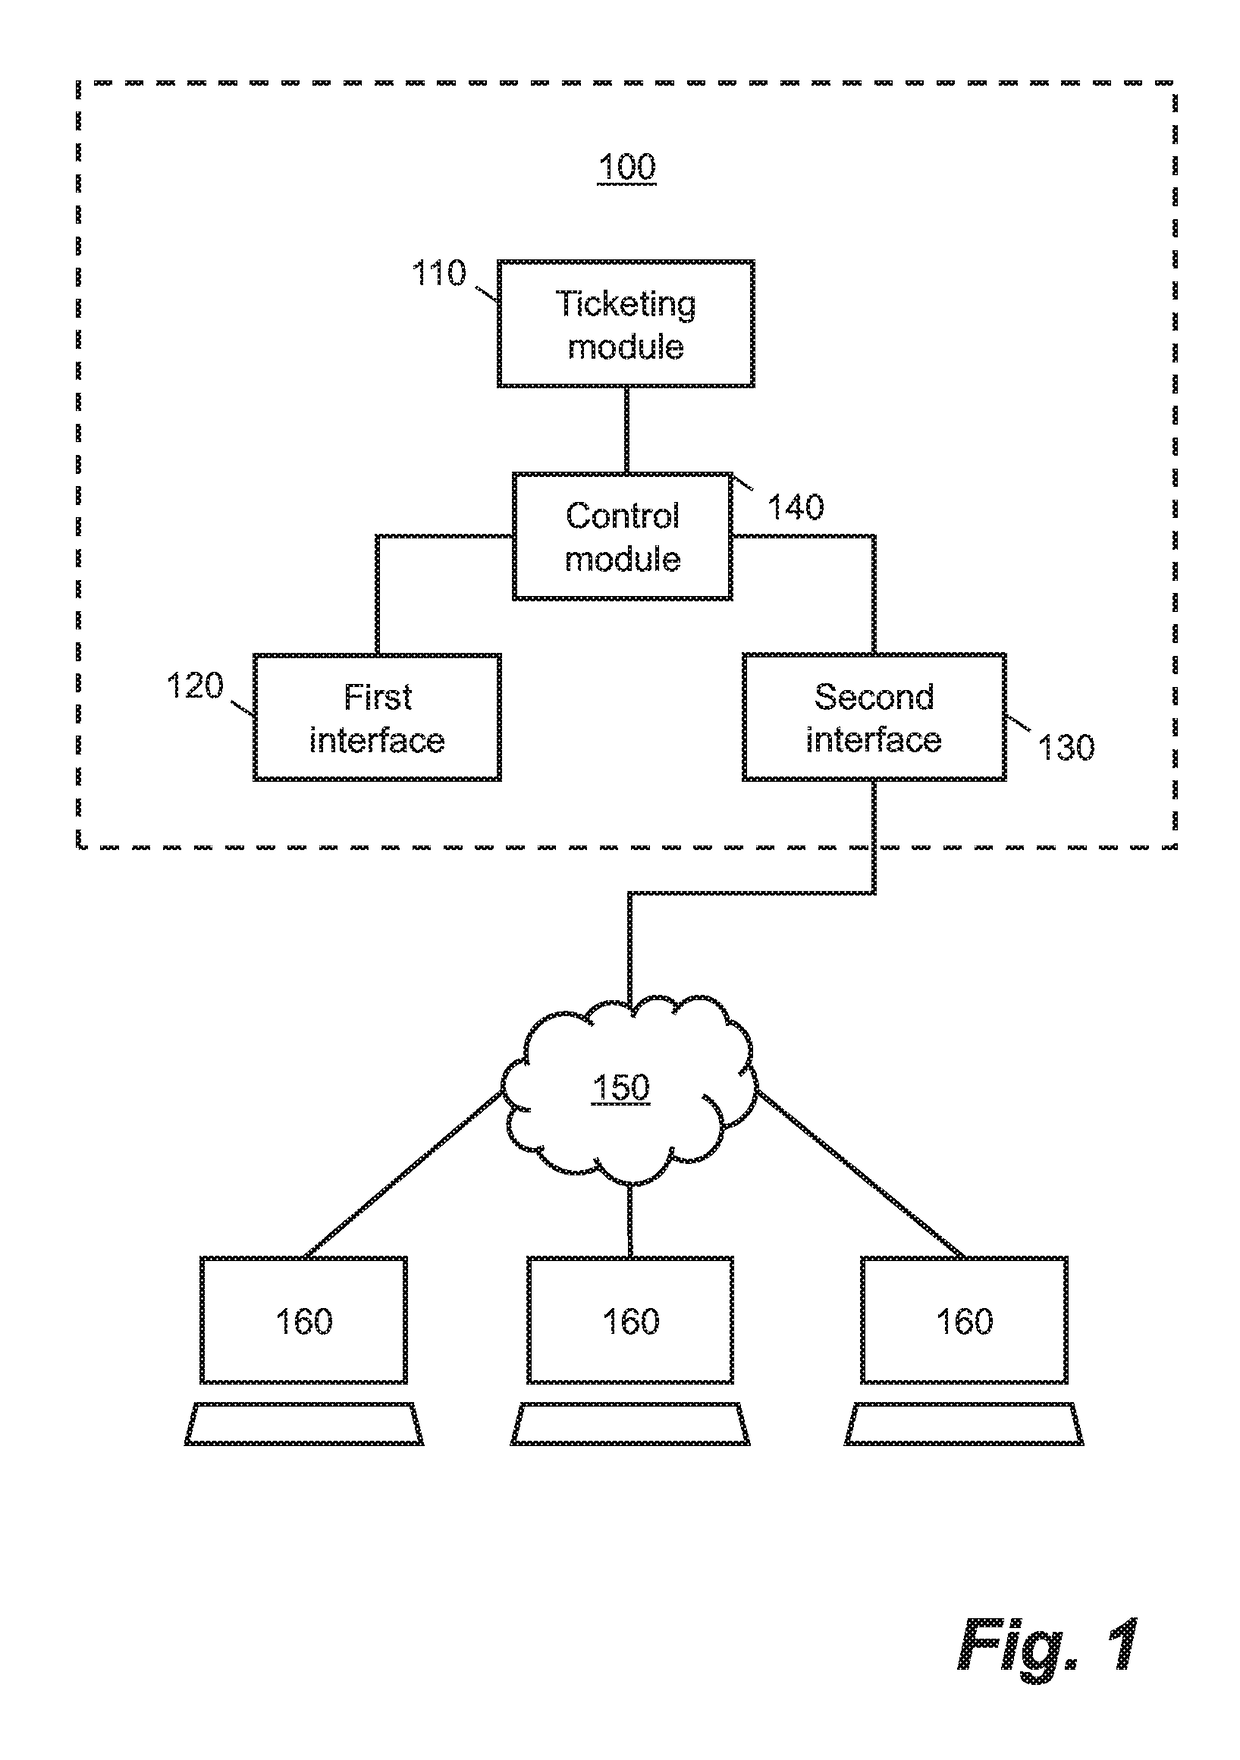 System and method for management of operational incidents by a facility support service